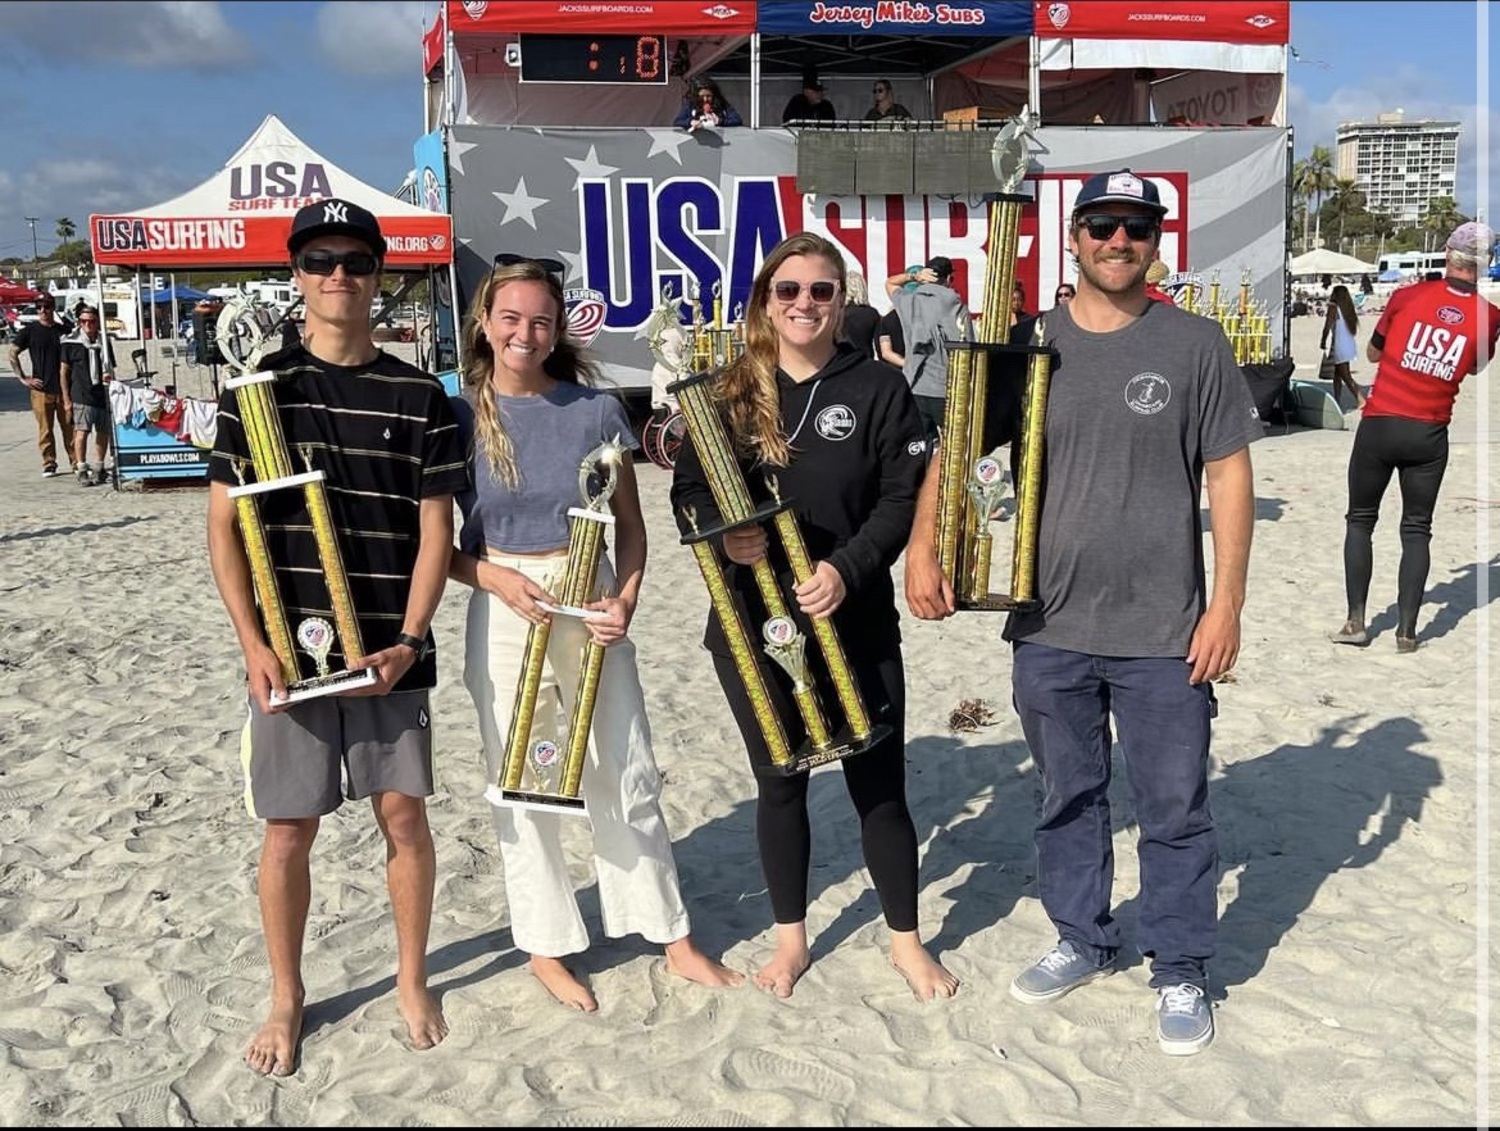 Montauk resident and East Hampton High School senior Chase Lieder, far left, with his teammates after qualifying for Team USA in the longboard division.